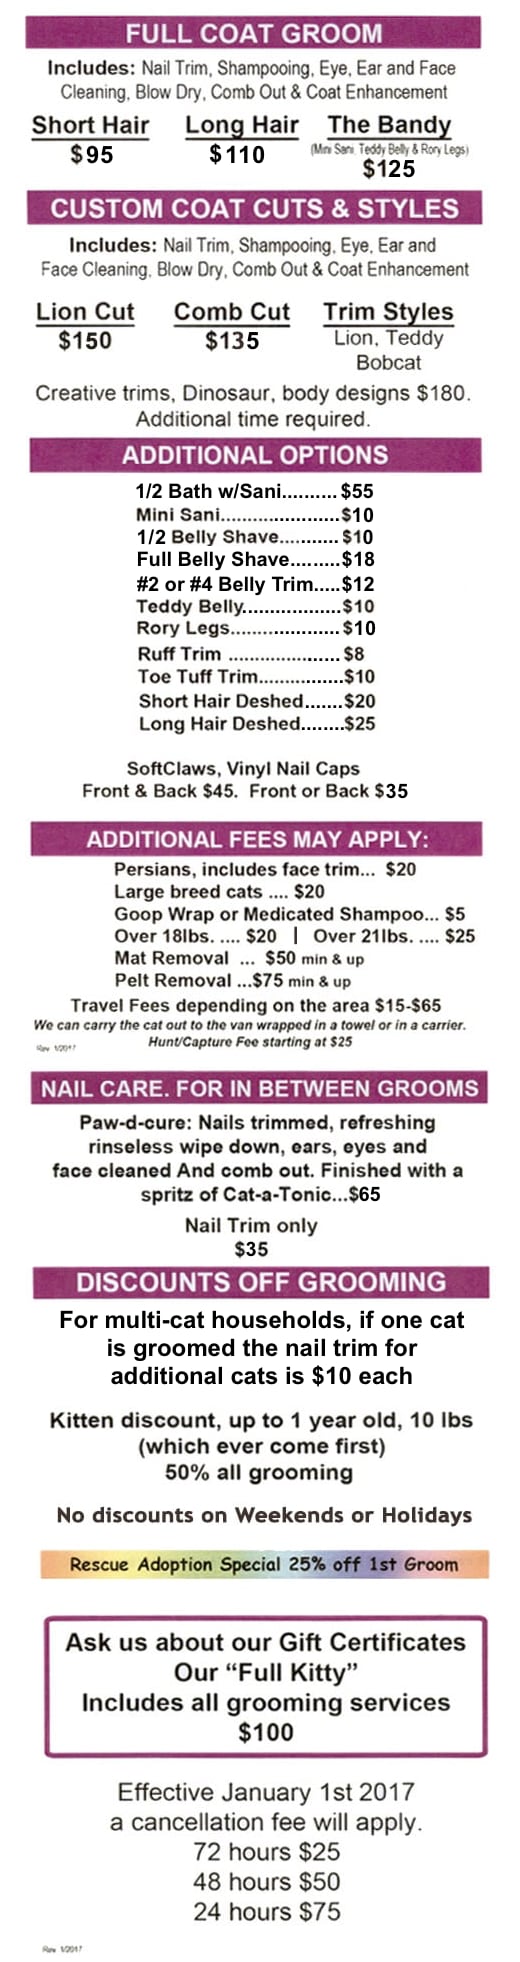 Services offered at Gabi Kat Grooming